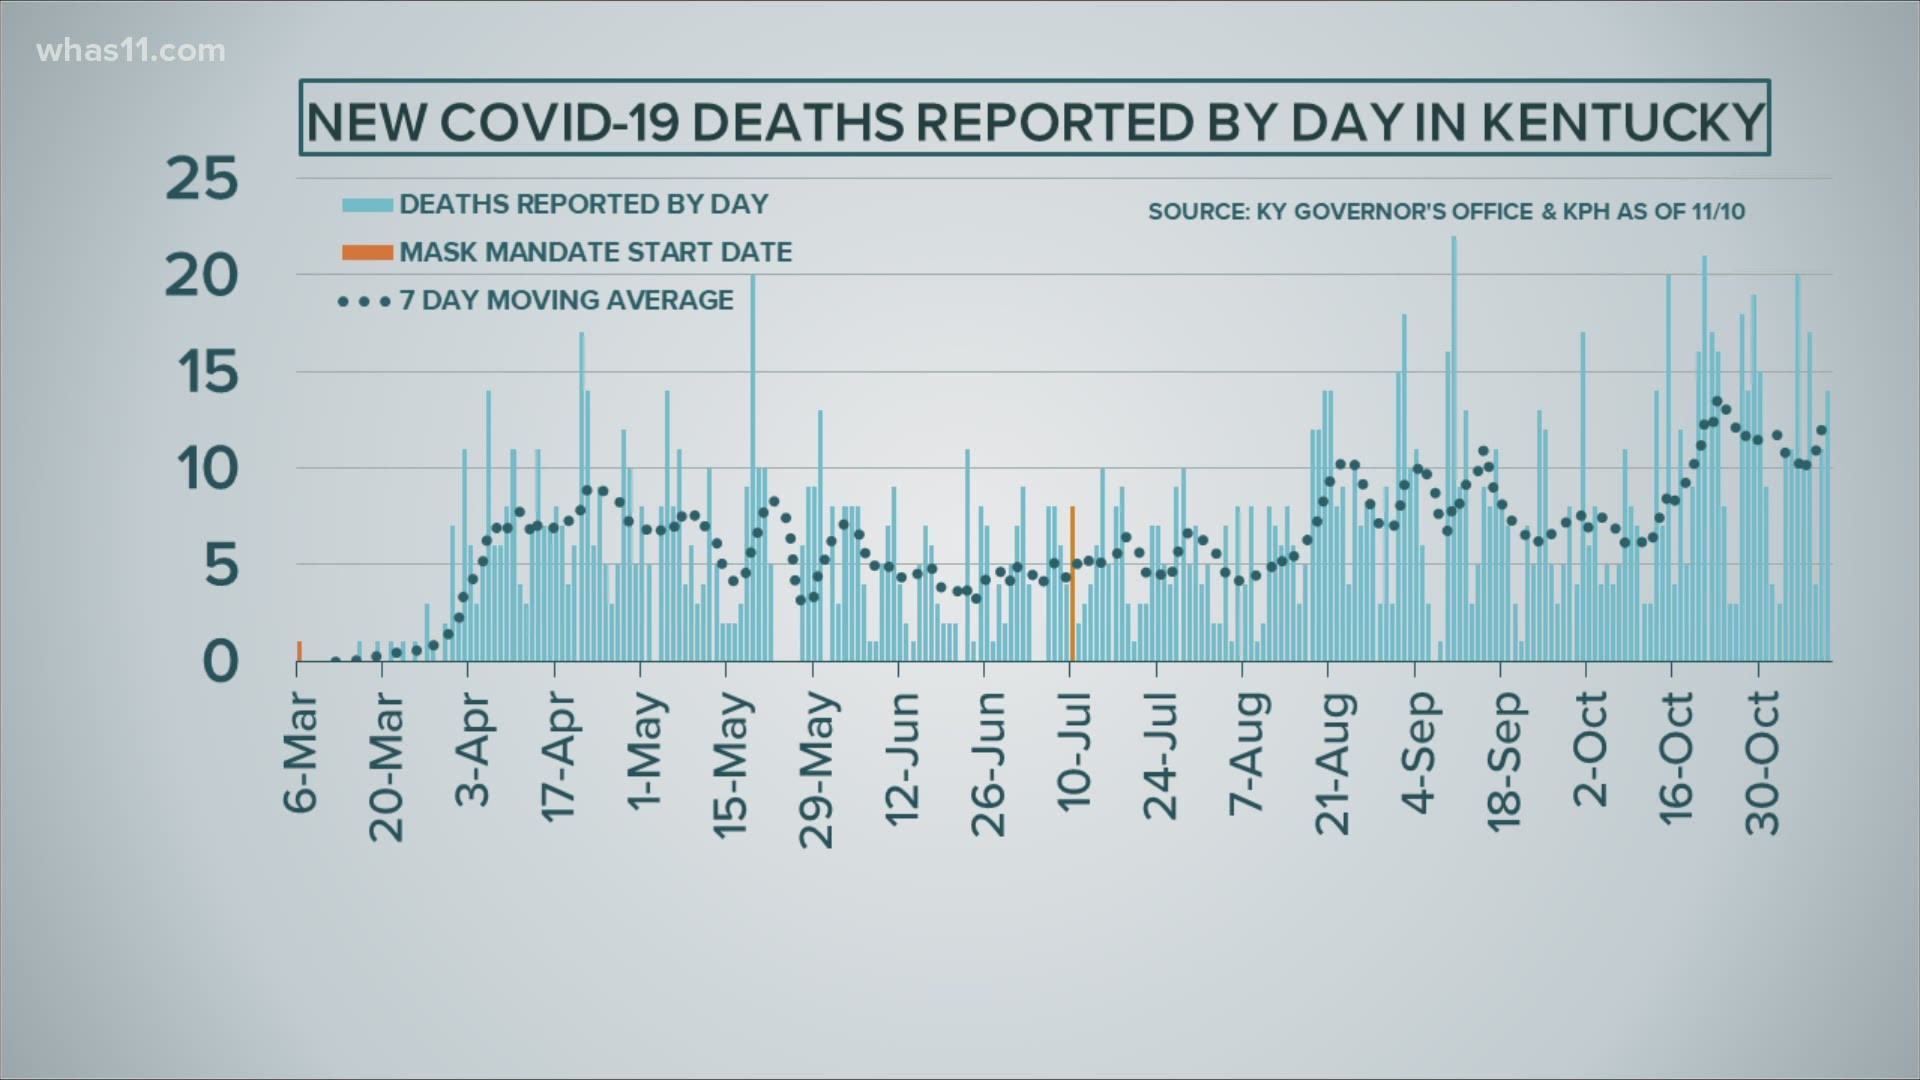 Both states are seeing an increase in COVID-19 related deaths, with Indiana reporting its most death Tuesday.